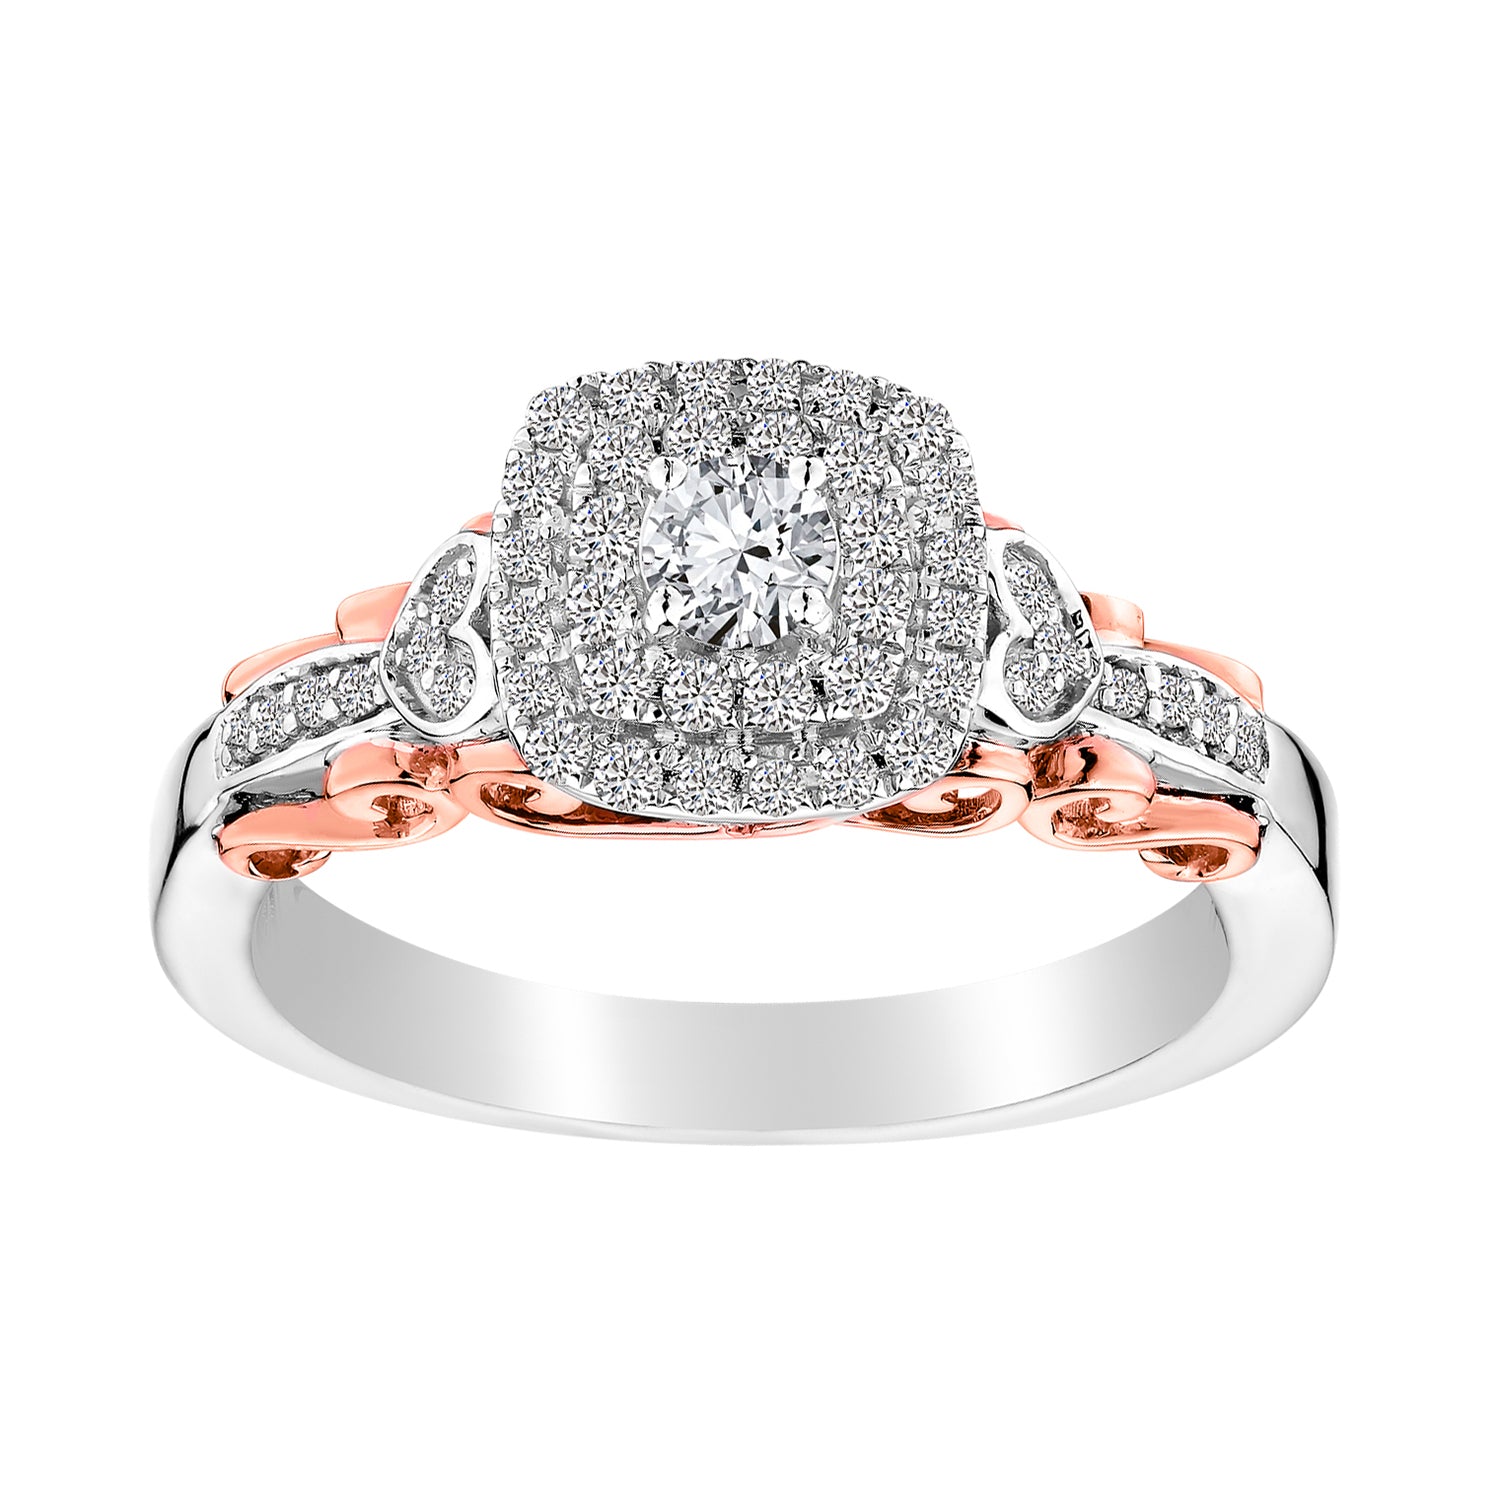 .40 Carat Diamond Ring, 10kt White & Rose Gold (Two Tone) - Griffin Jewellery Designs